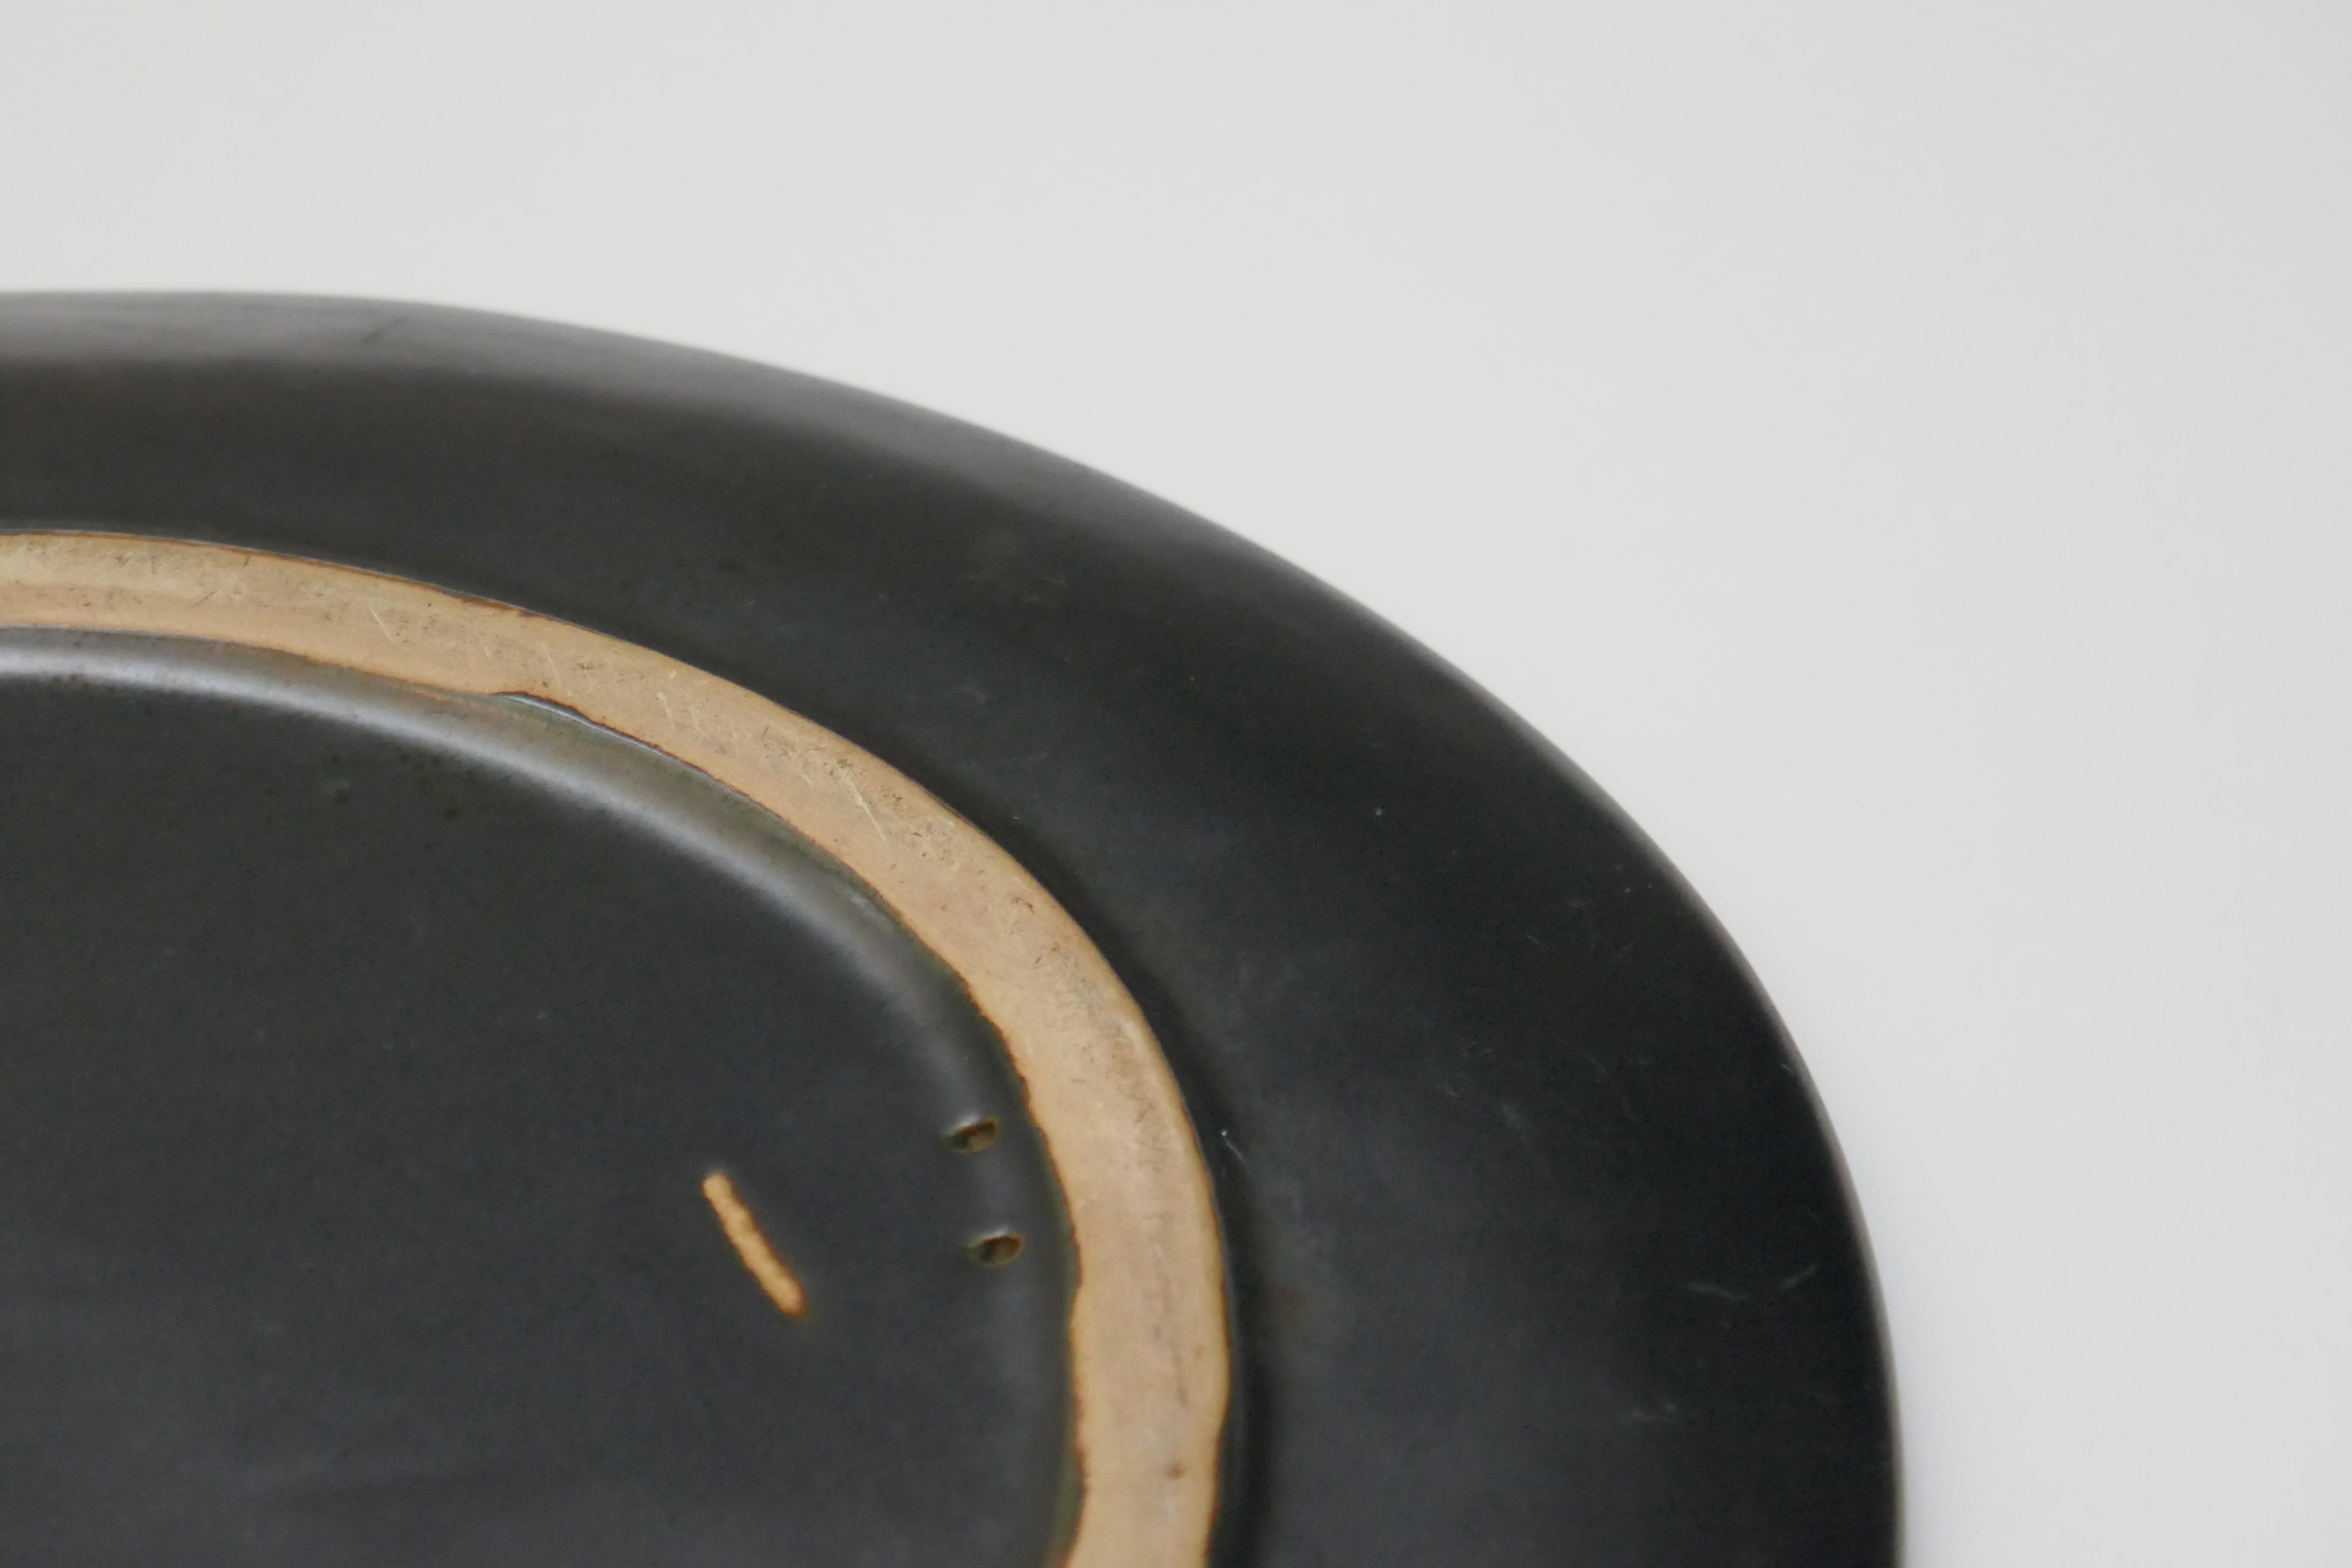 Free Form Black Ceramic Dishes/Plaques by Peter Orlando, France, 1960s For Sale 4